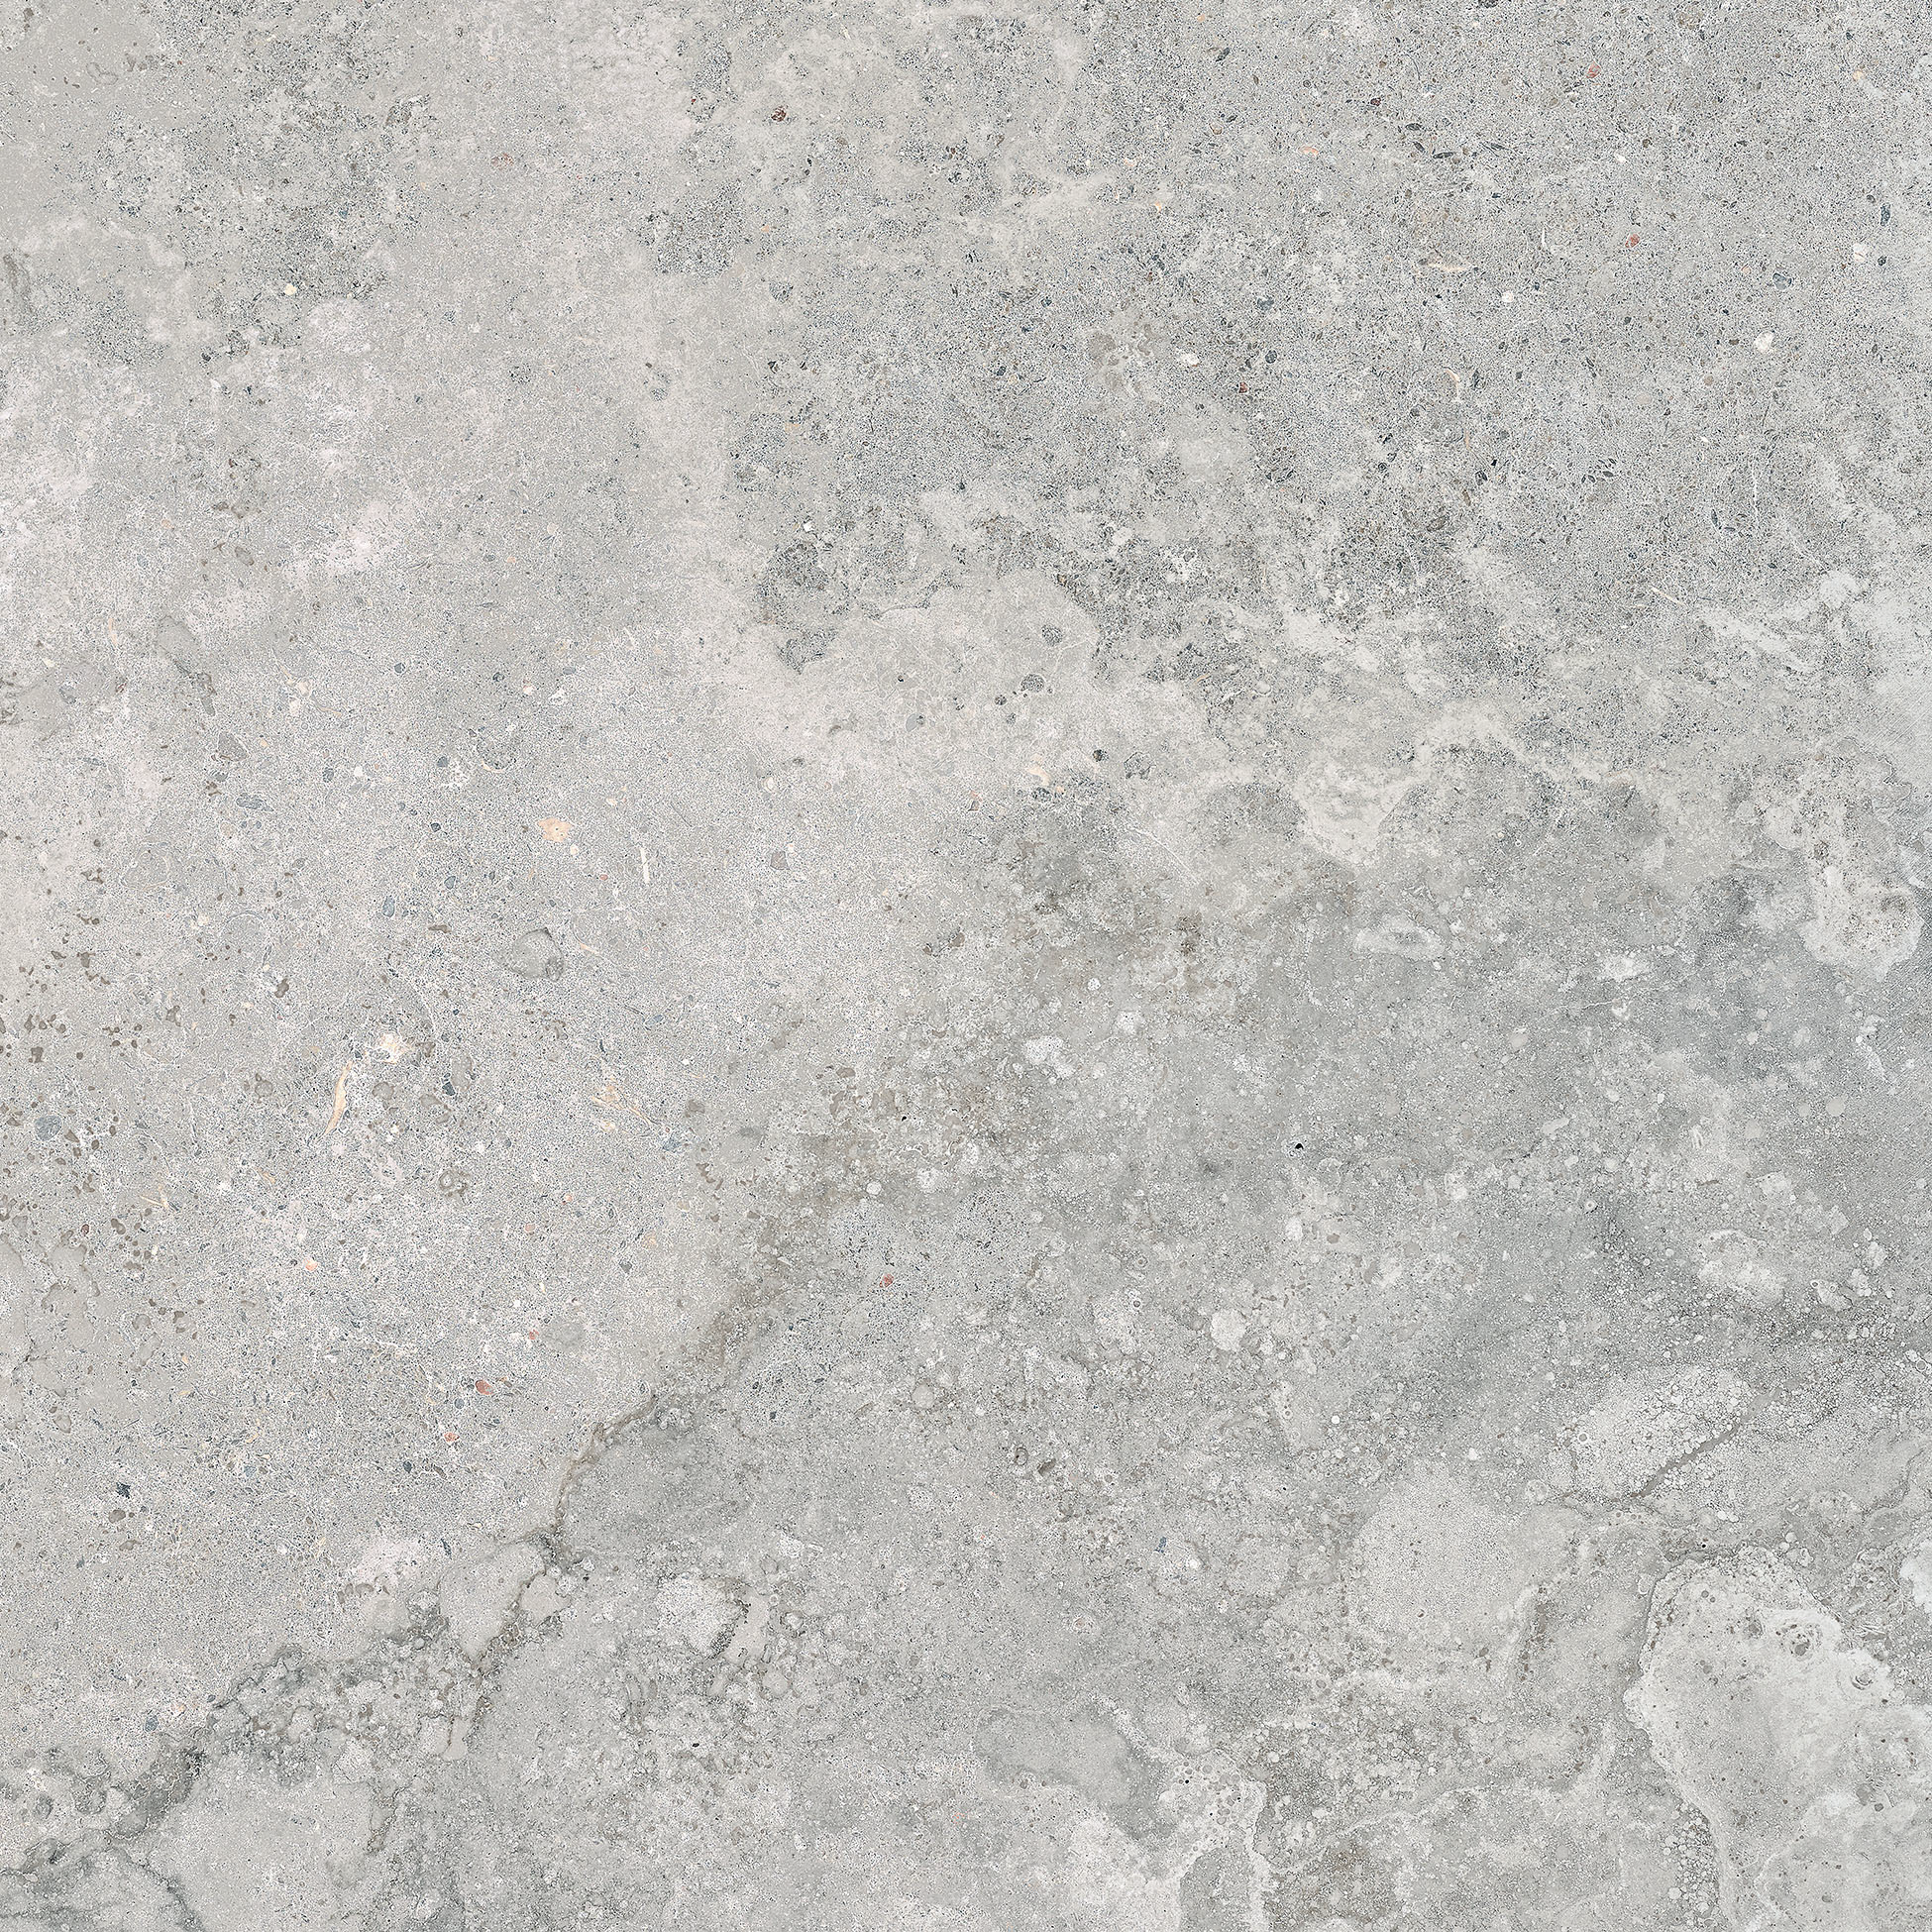 argento pattern glazed porcelain field tile from veneta anatolia collection distributed by surface group international matte finish pressed edge 13x13 square shape